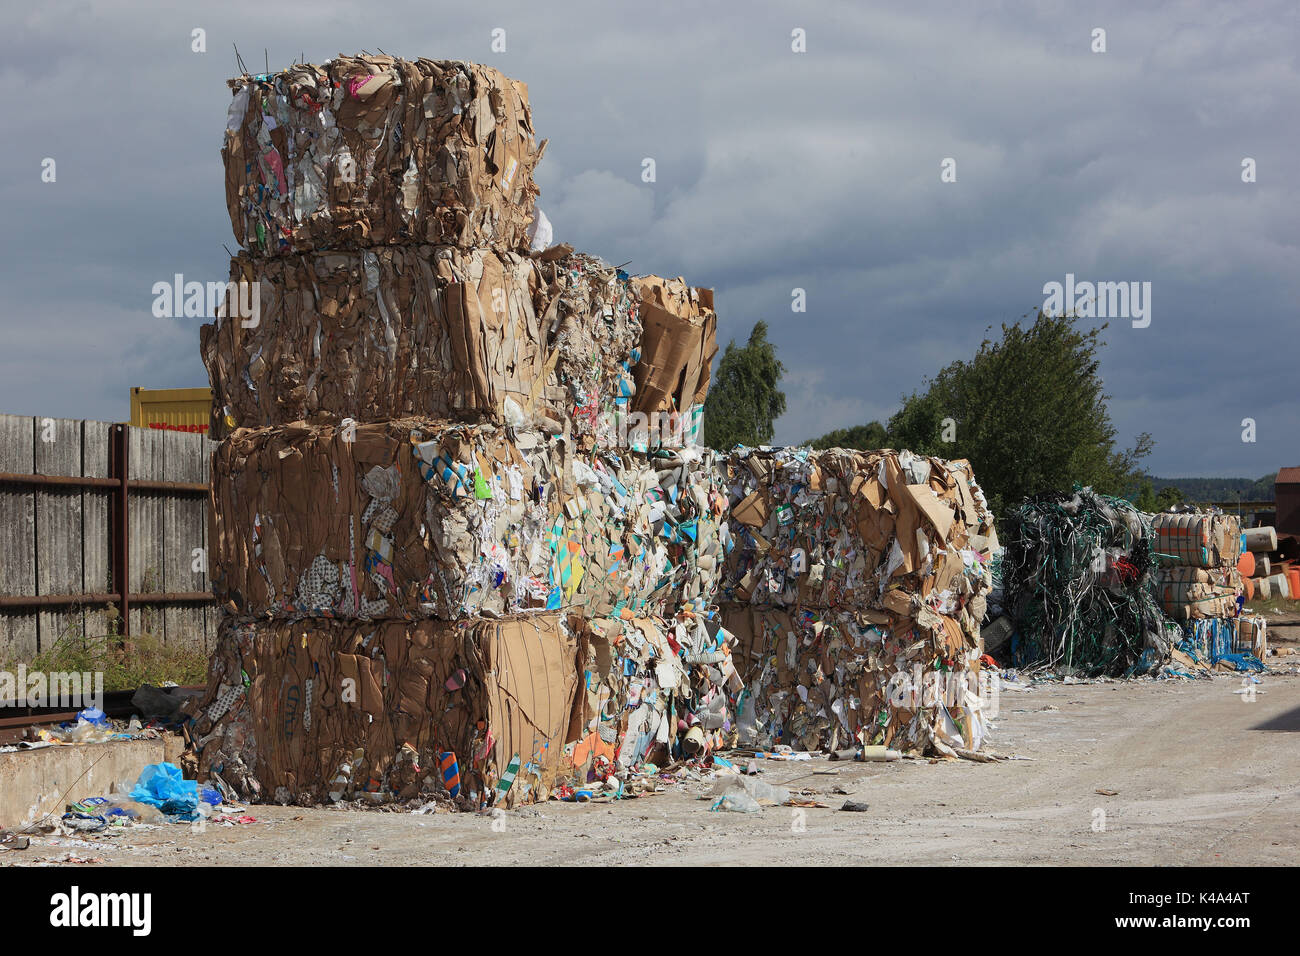 stock of waste paper to the recycling in a recycling company, Lager von Altpapier zur Wiederverwertung in einem Recyclingbetrieb Stock Photo